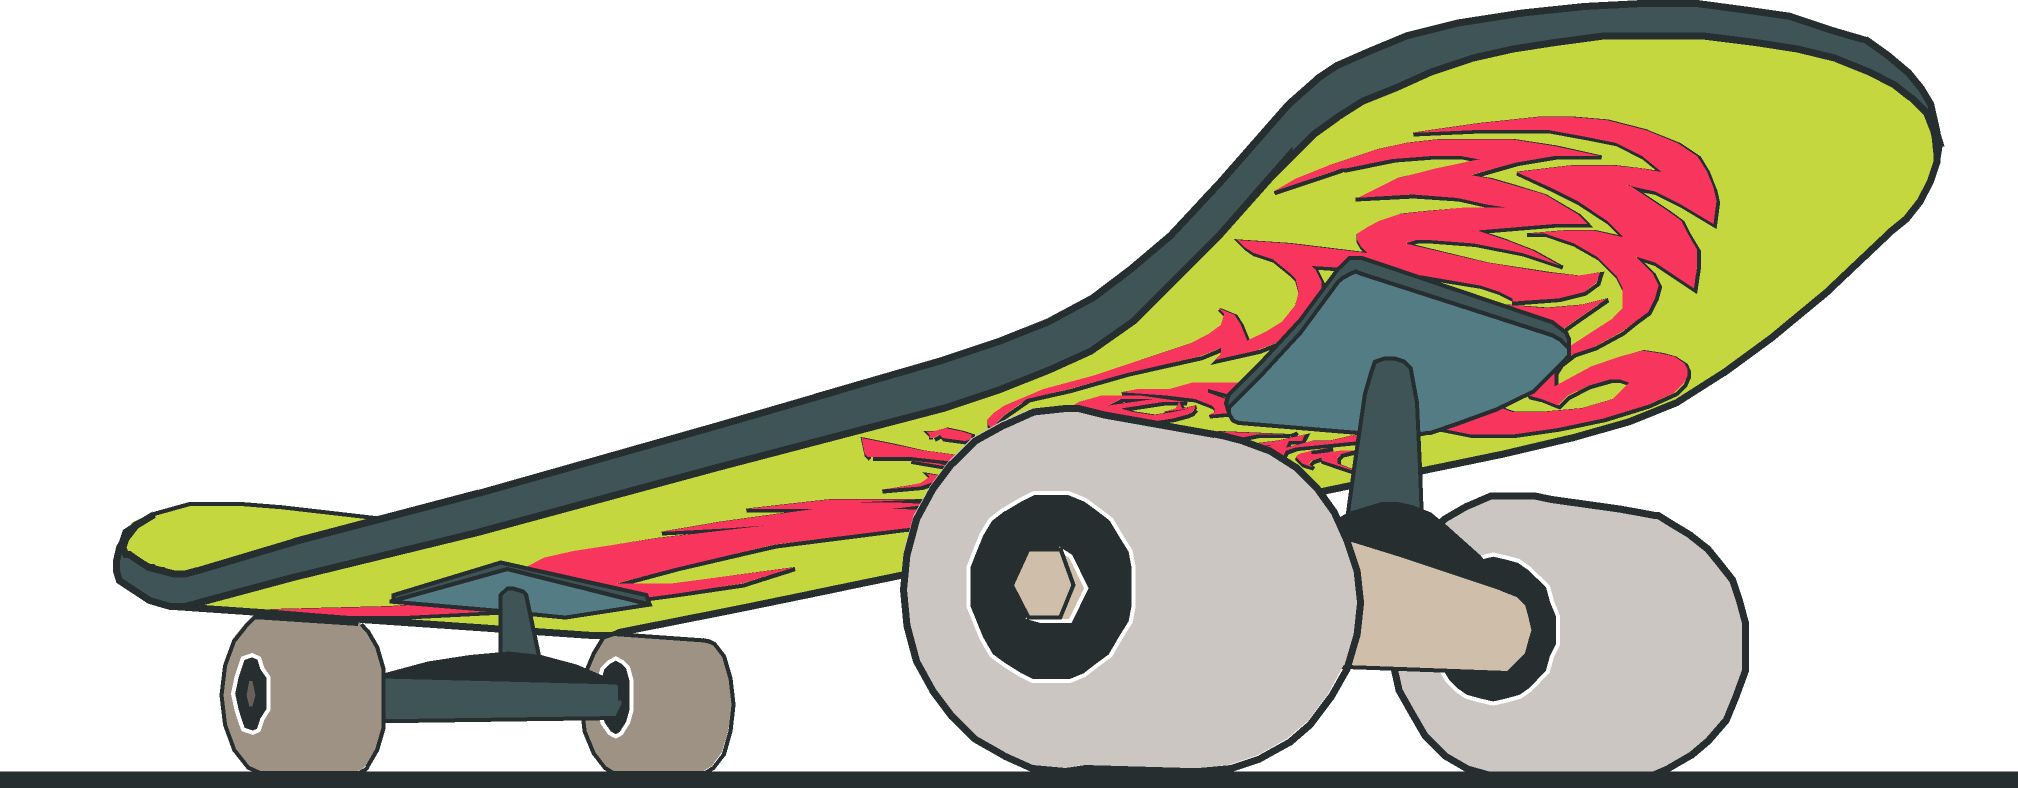 Skateboard close up with design Free Vector / 4Vector